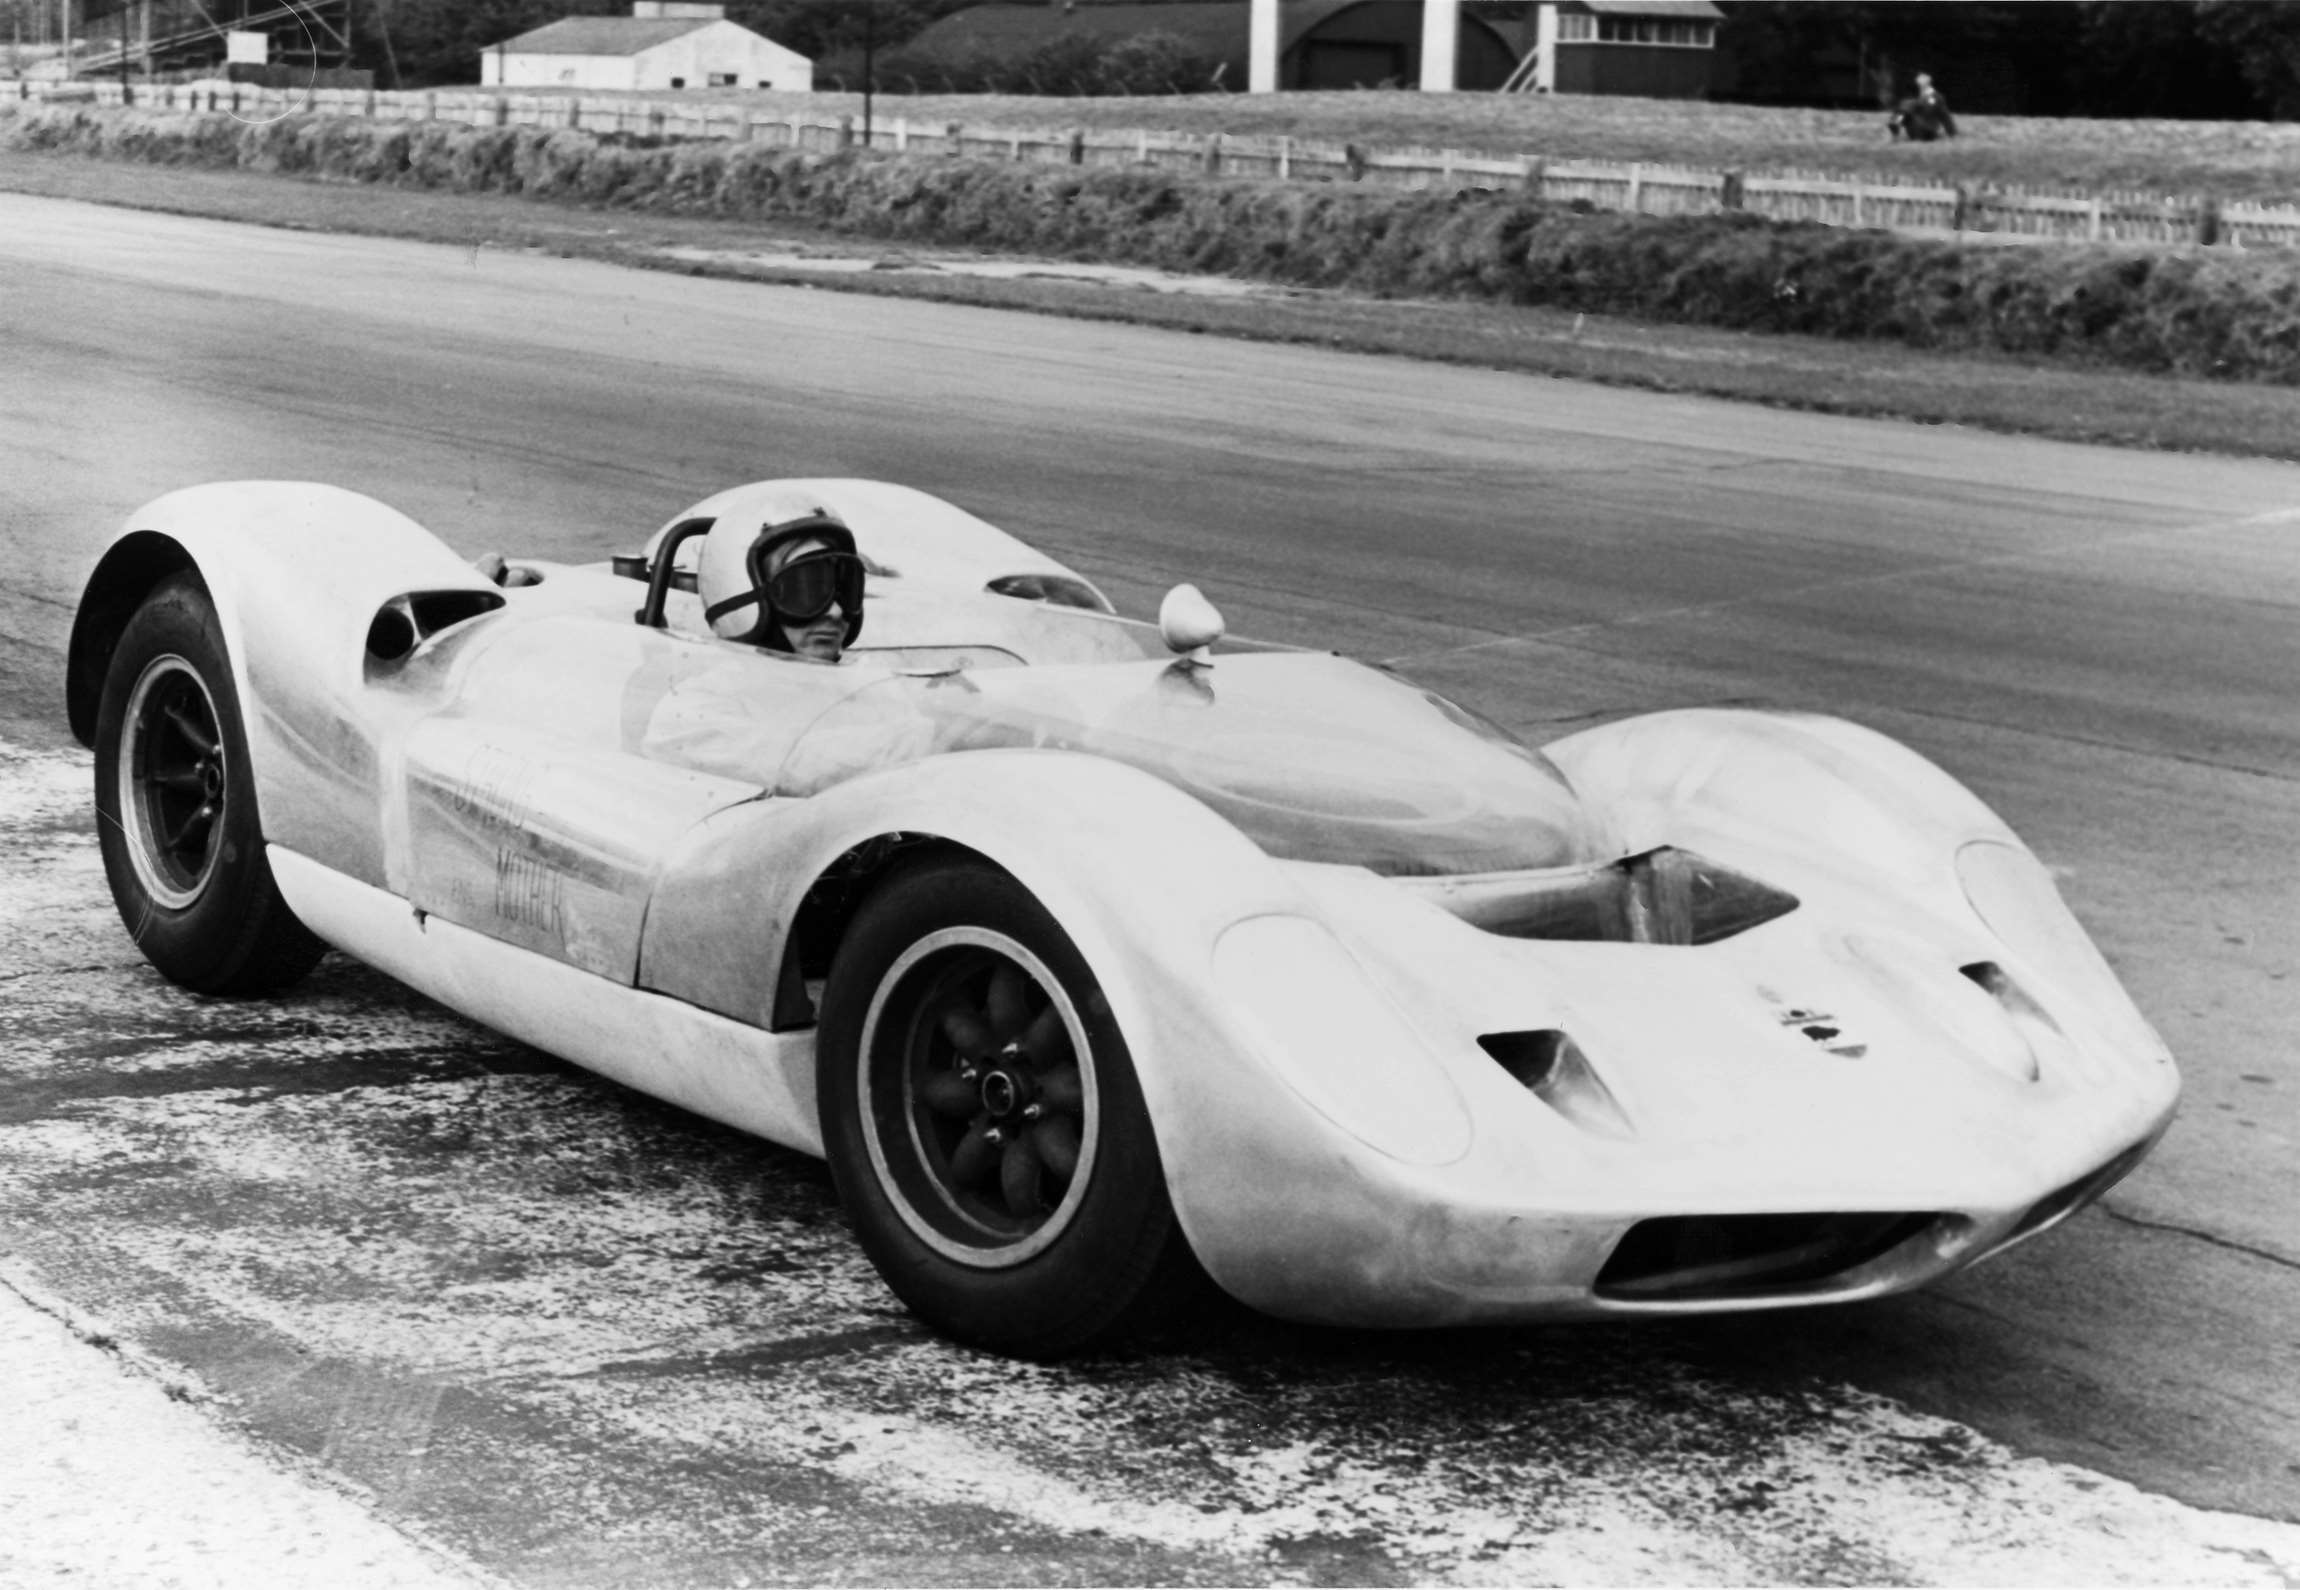 Bruce in the prototype McLaren-Oldsmobile Mark 1 ‘Strong Mother’ testing at Goodwood - 1964